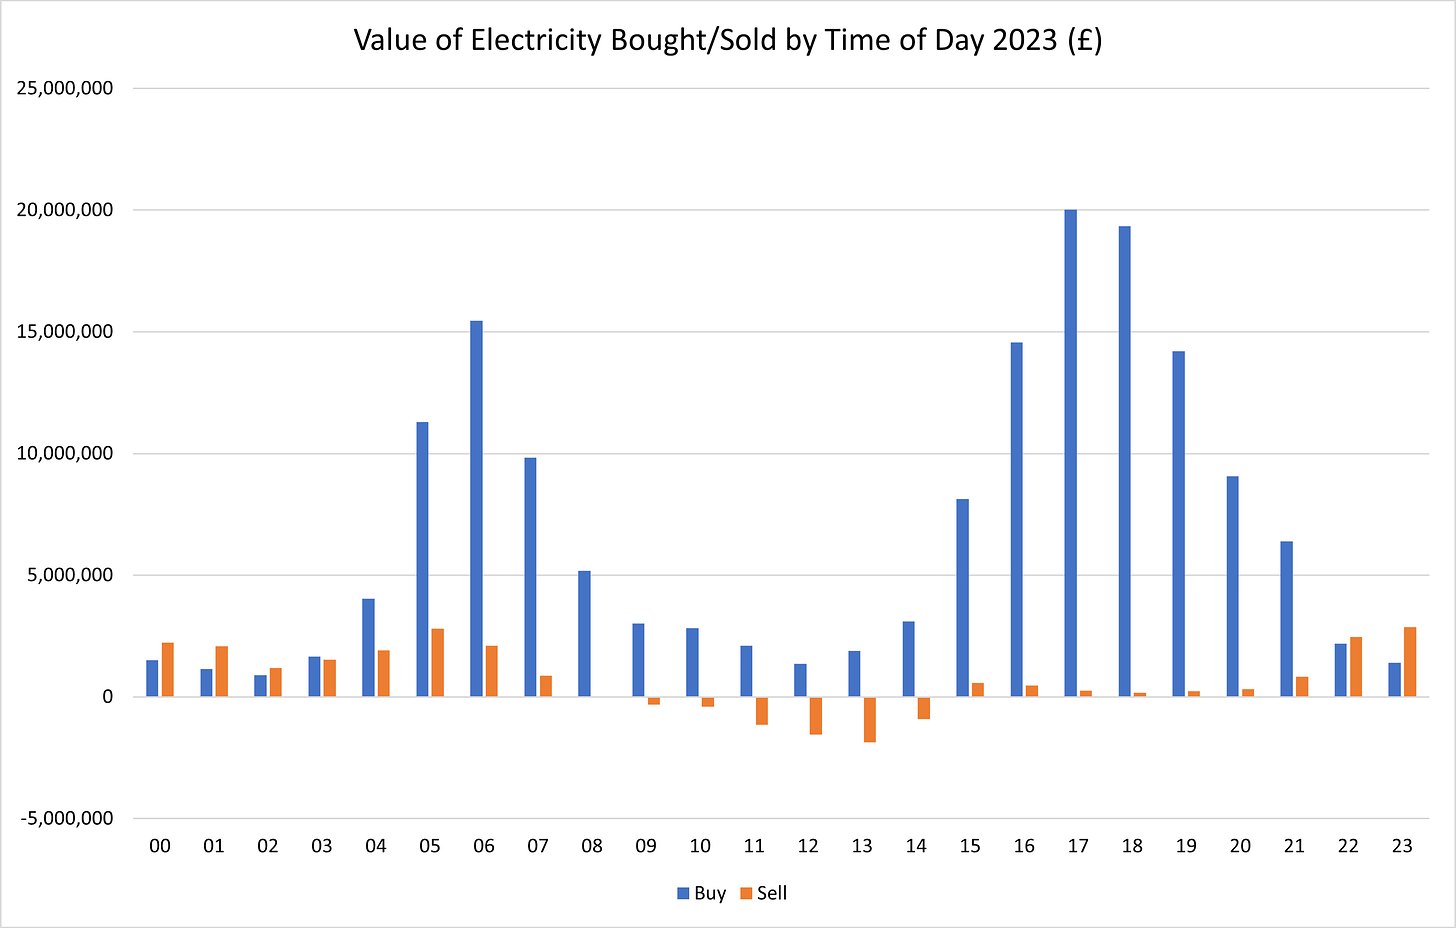 Figure 7b - Value of Interconnector Electricity Bought and Sold by Time of Day 2023 (£)